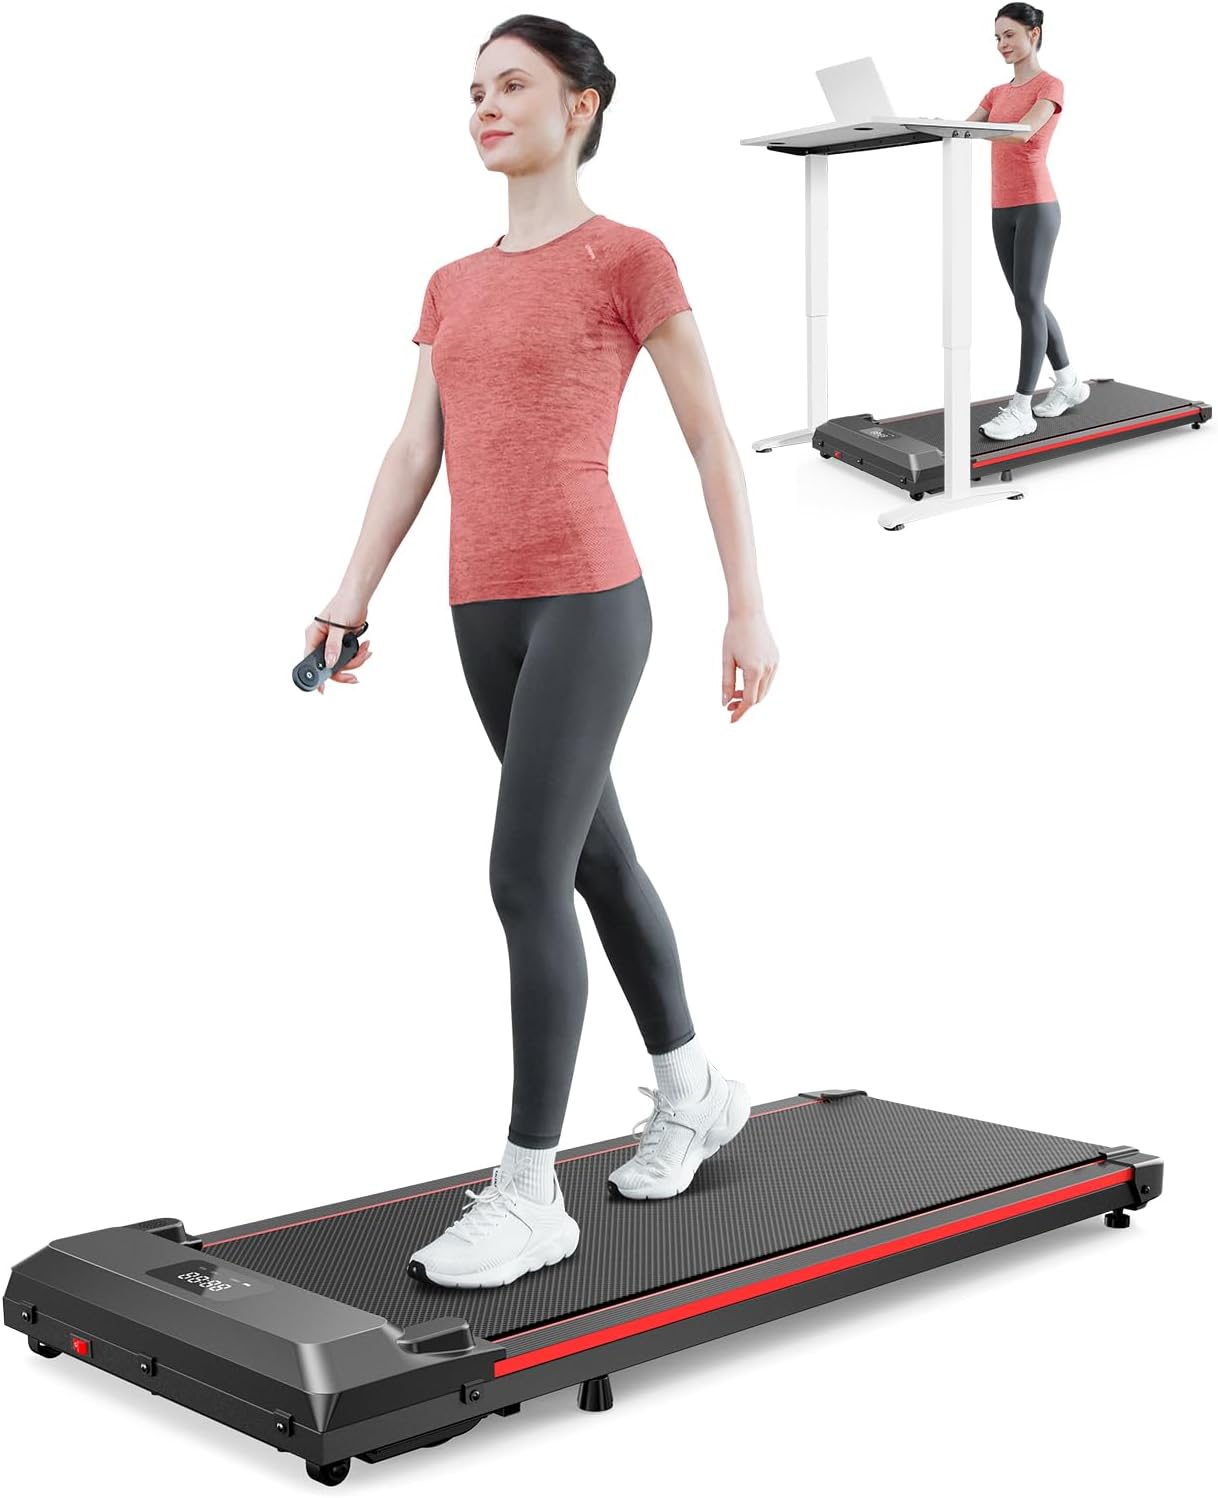 Walking Pad, GORPORE Under Desk Treadmill 2 in 1 for Home/Office Exercise, Portable Walking Treadmill, Electric Walking Jogging Machine with Remote Control, LED Display